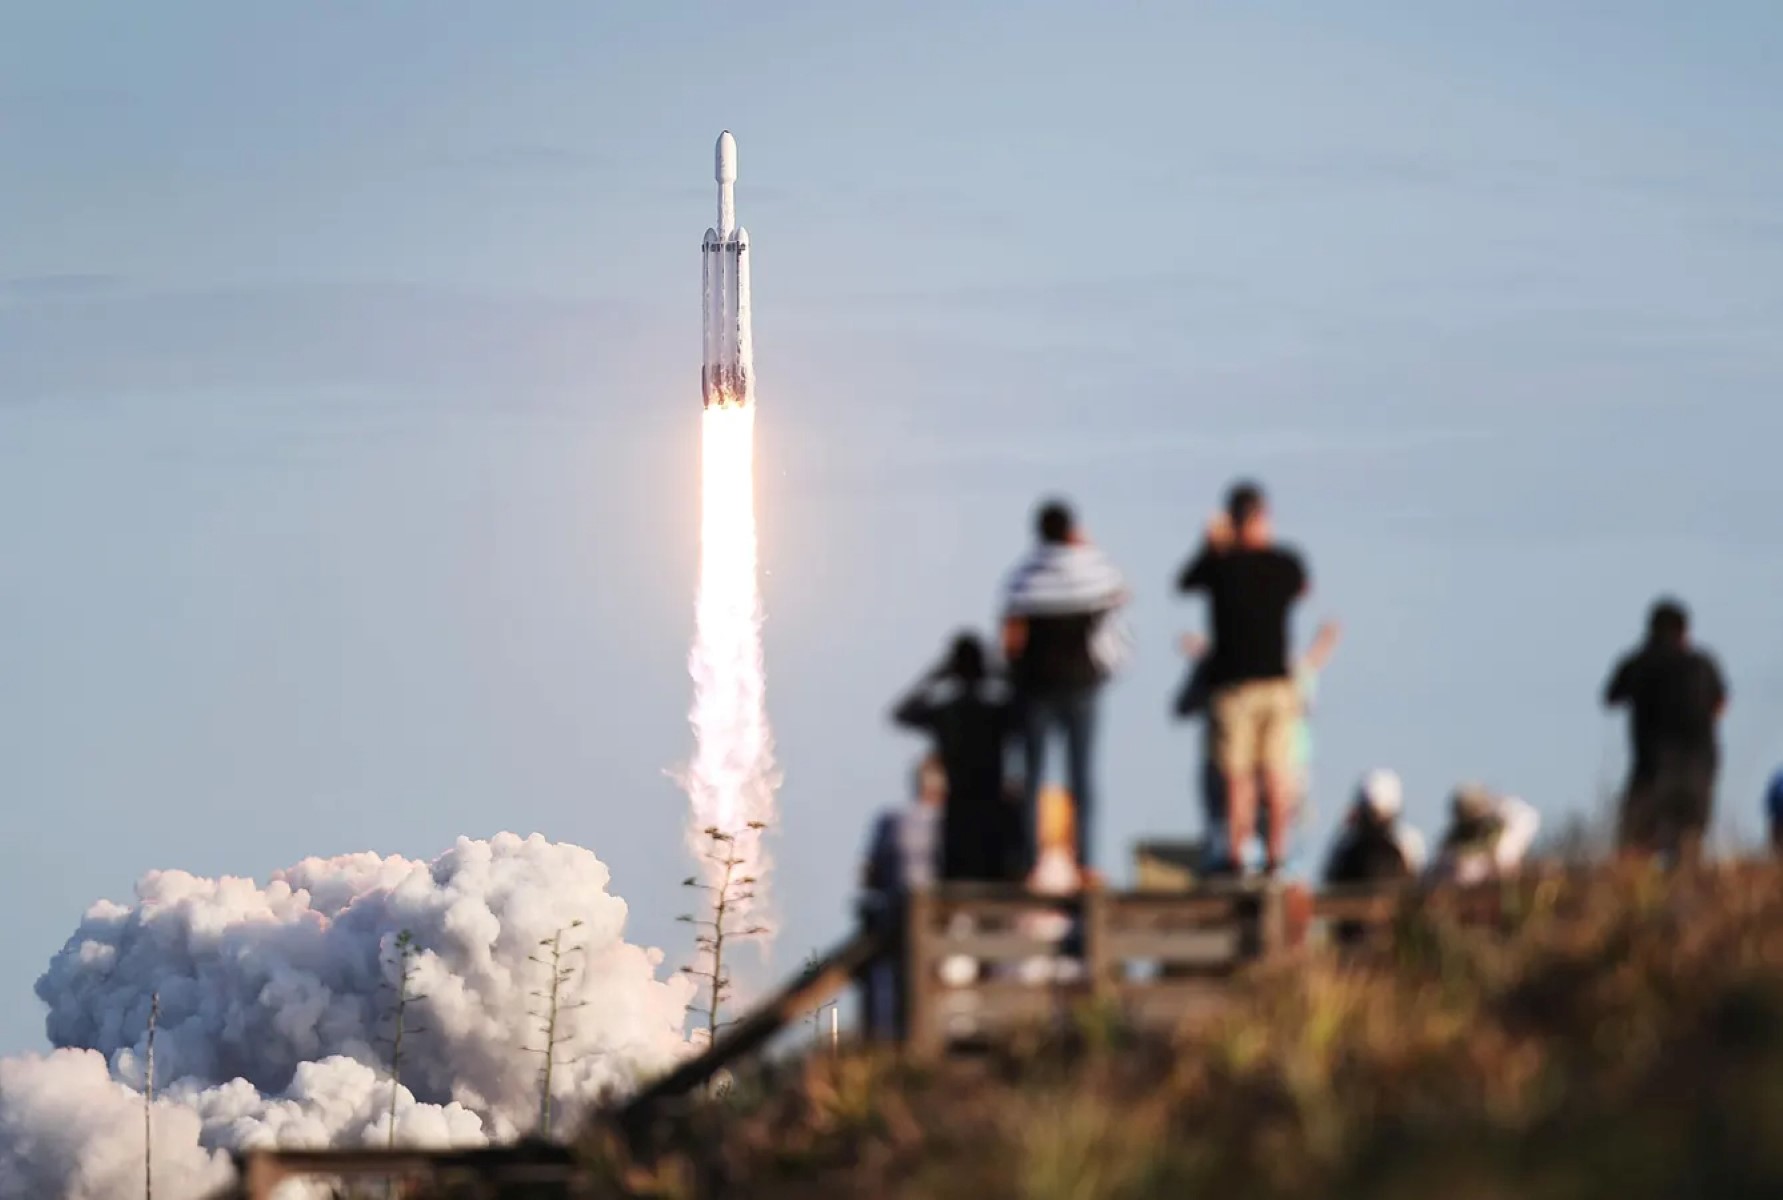 How To Watch Spacex Launch On TV